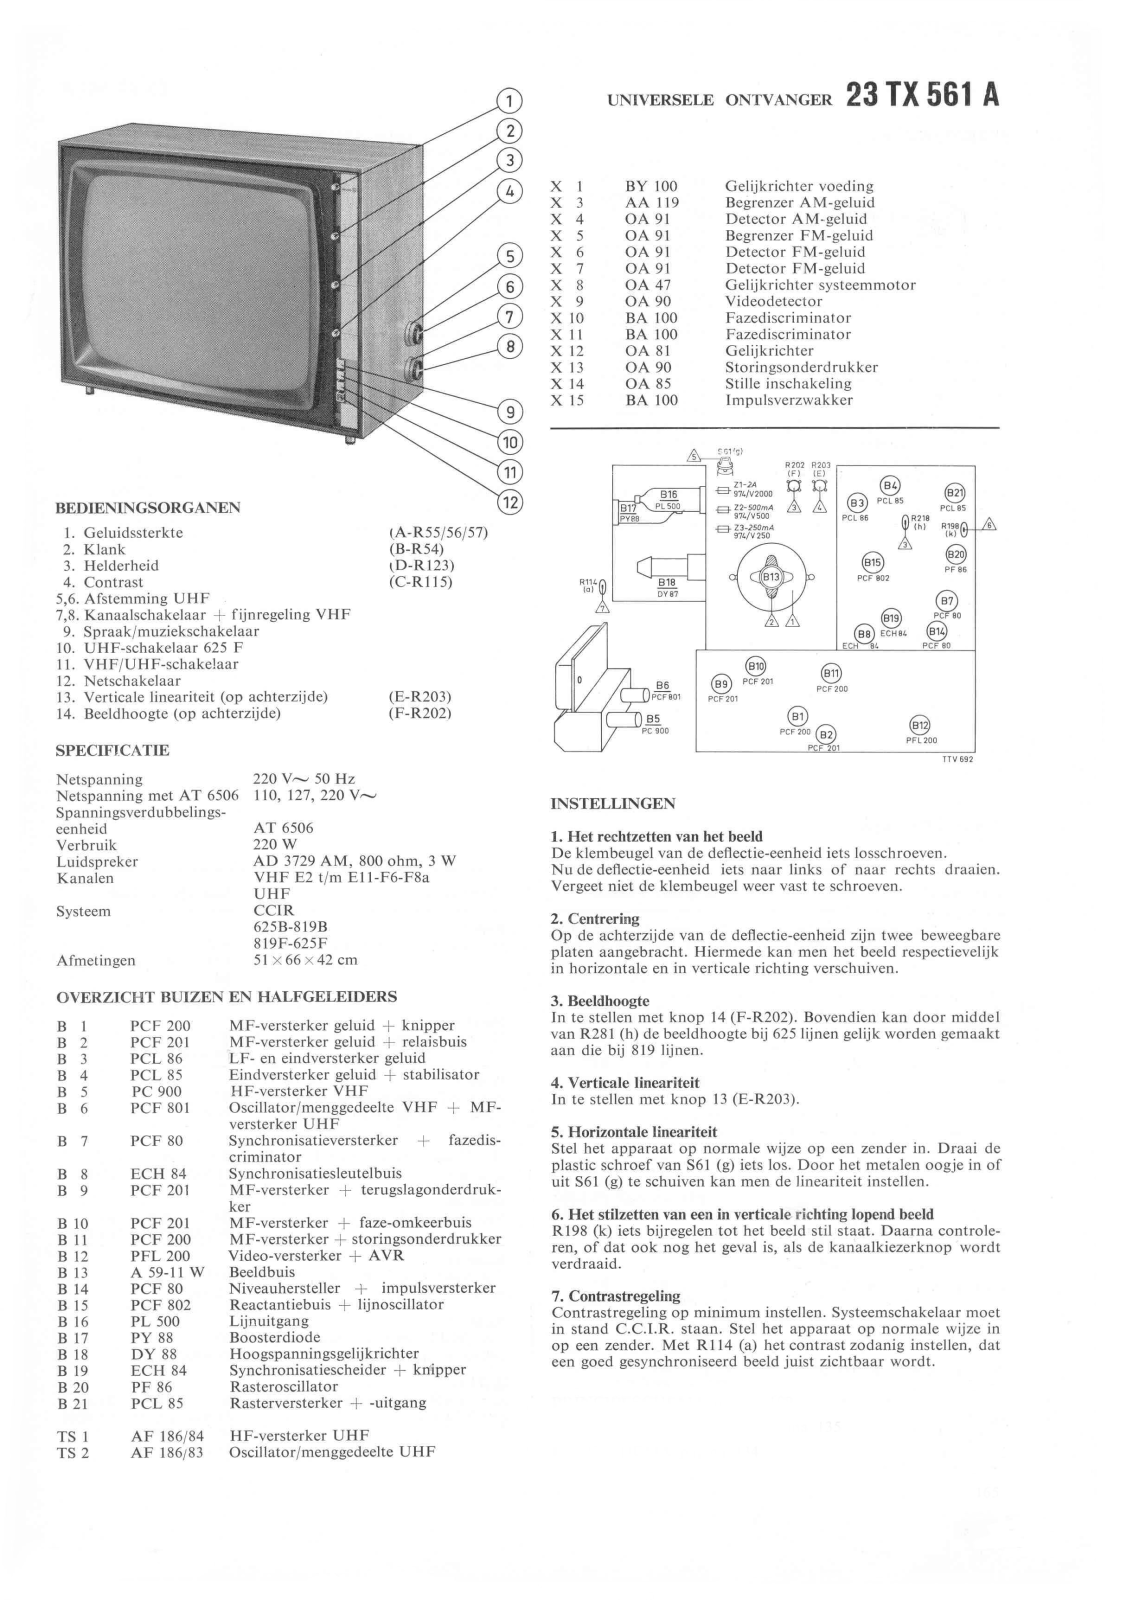 PHILIPS 23TX561A Service Manual